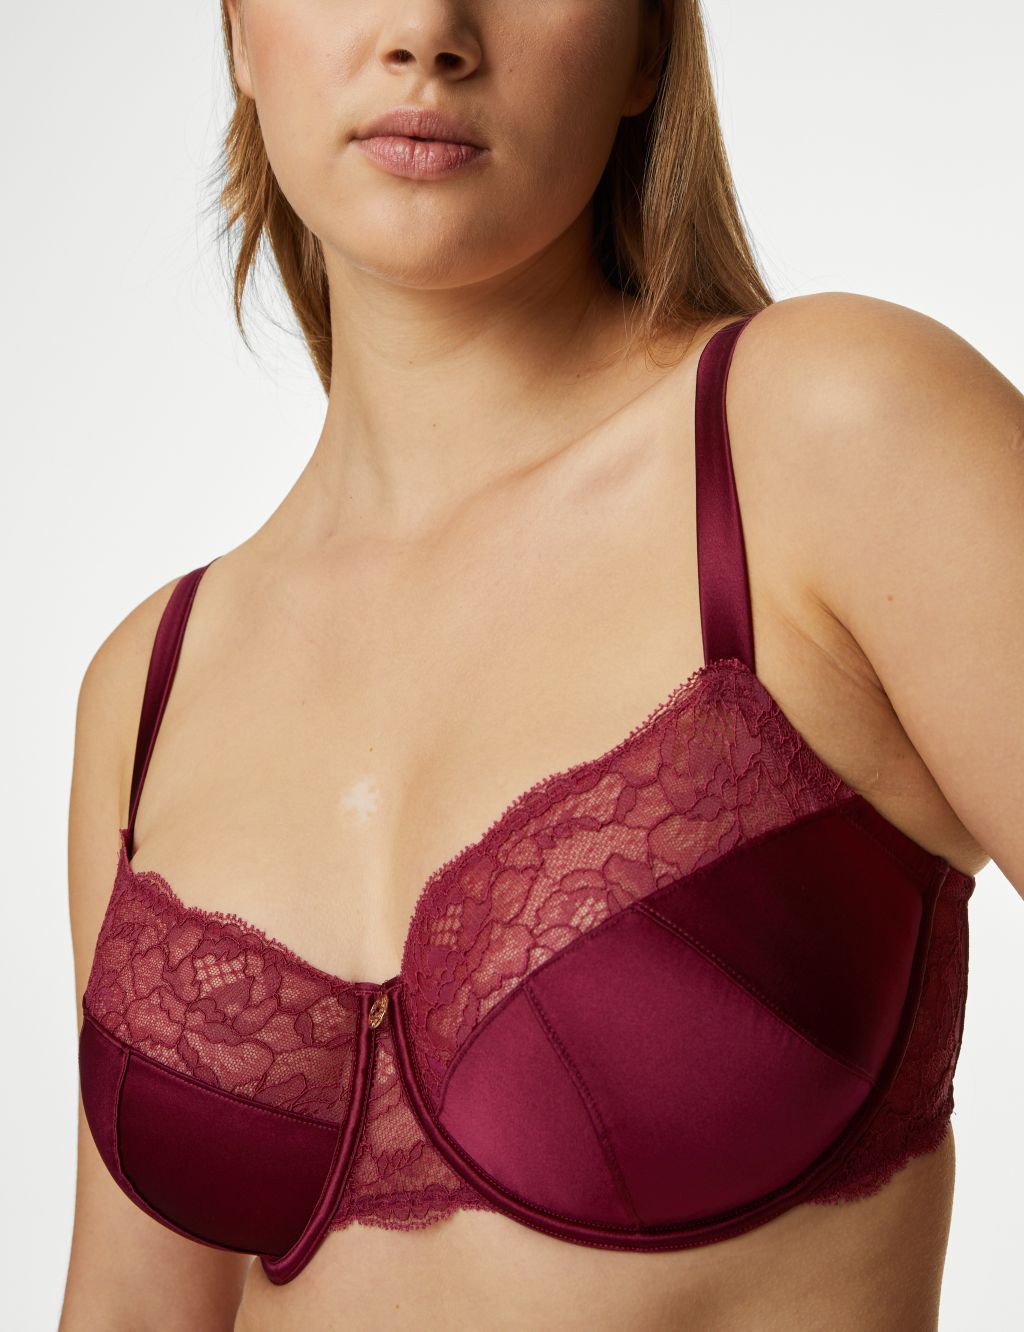 Claret Silk & Lace Wired Full Cup Bra F-H image 3